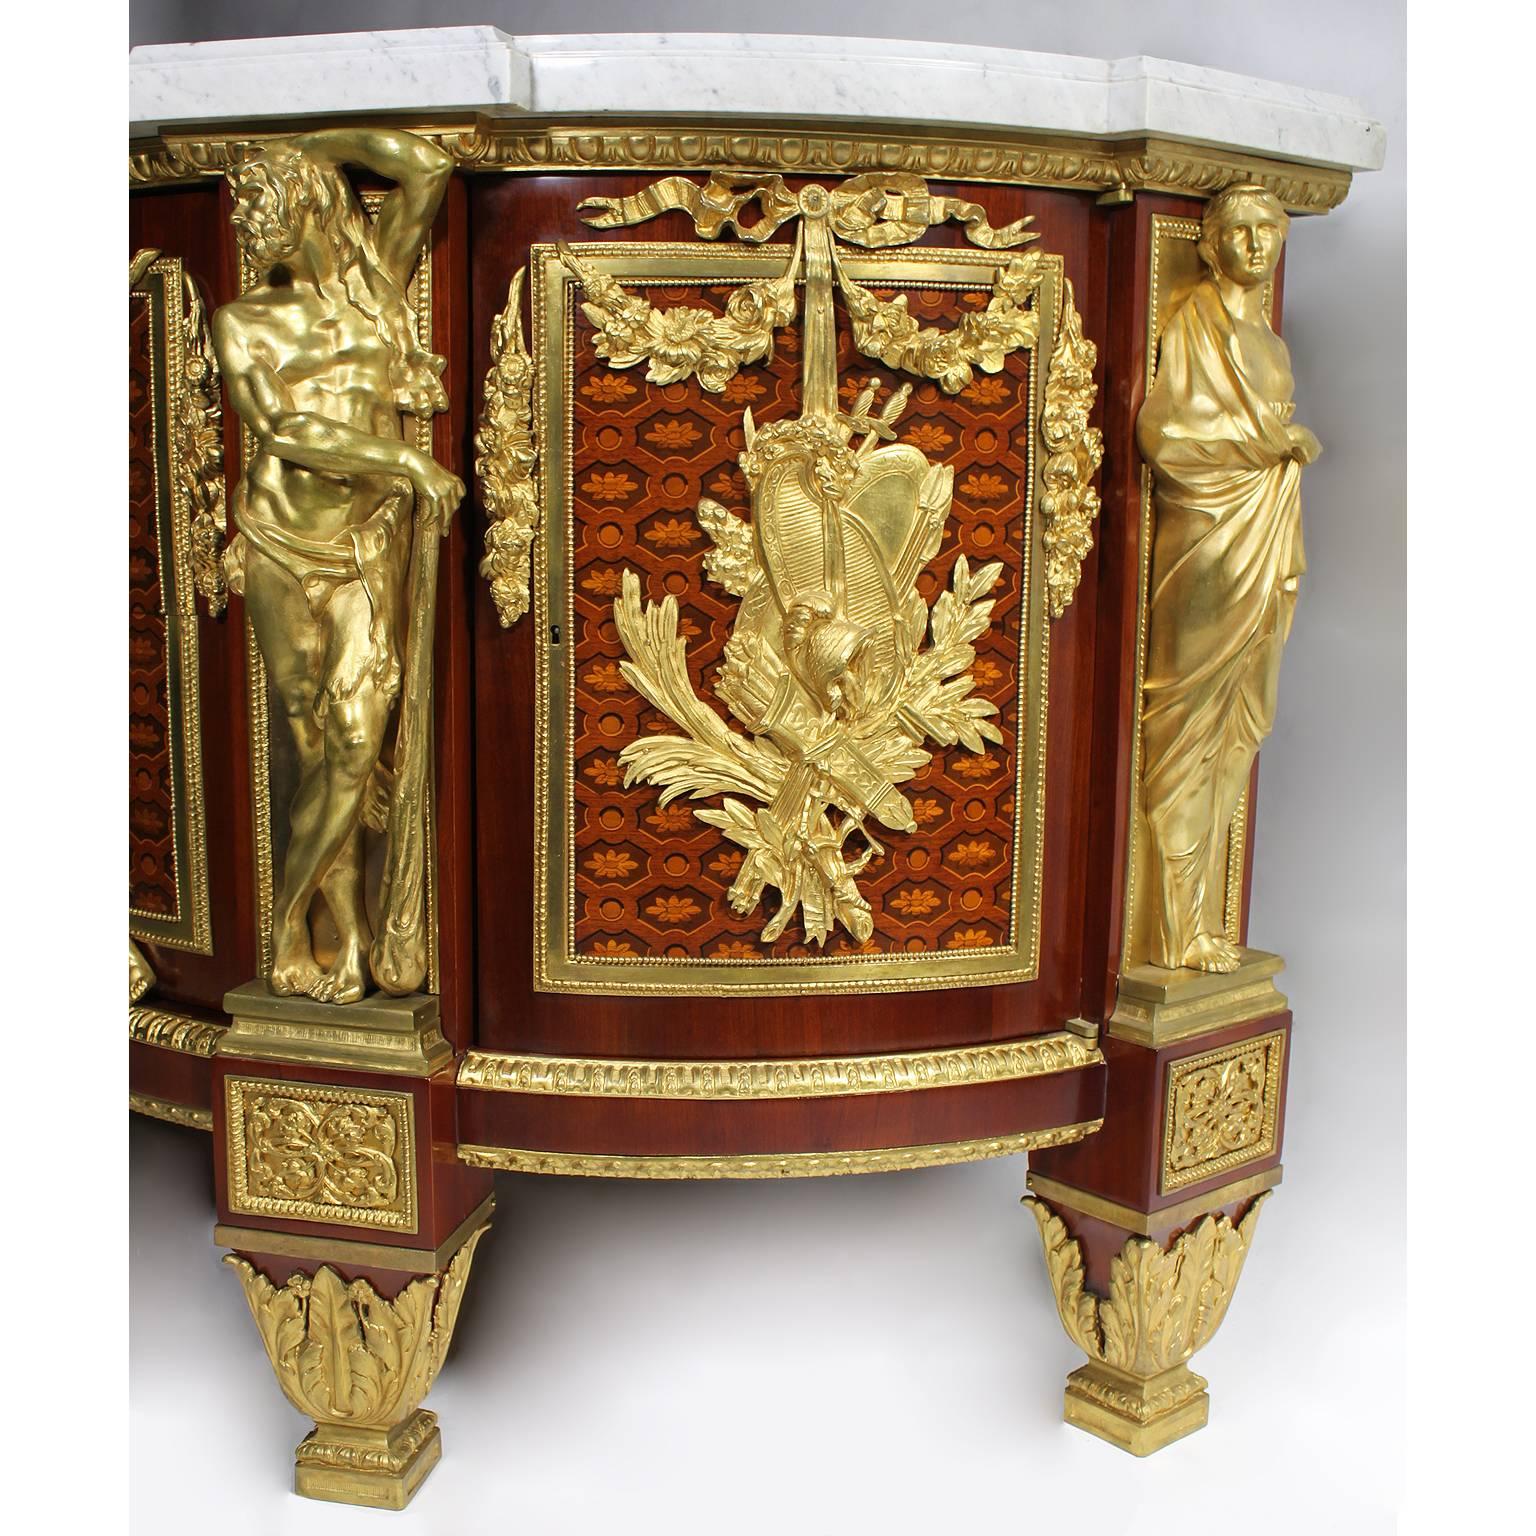 Fine French 19th Century Louis XVI Style Marquetry & Gilt-Bronze Mounted Commode For Sale 2